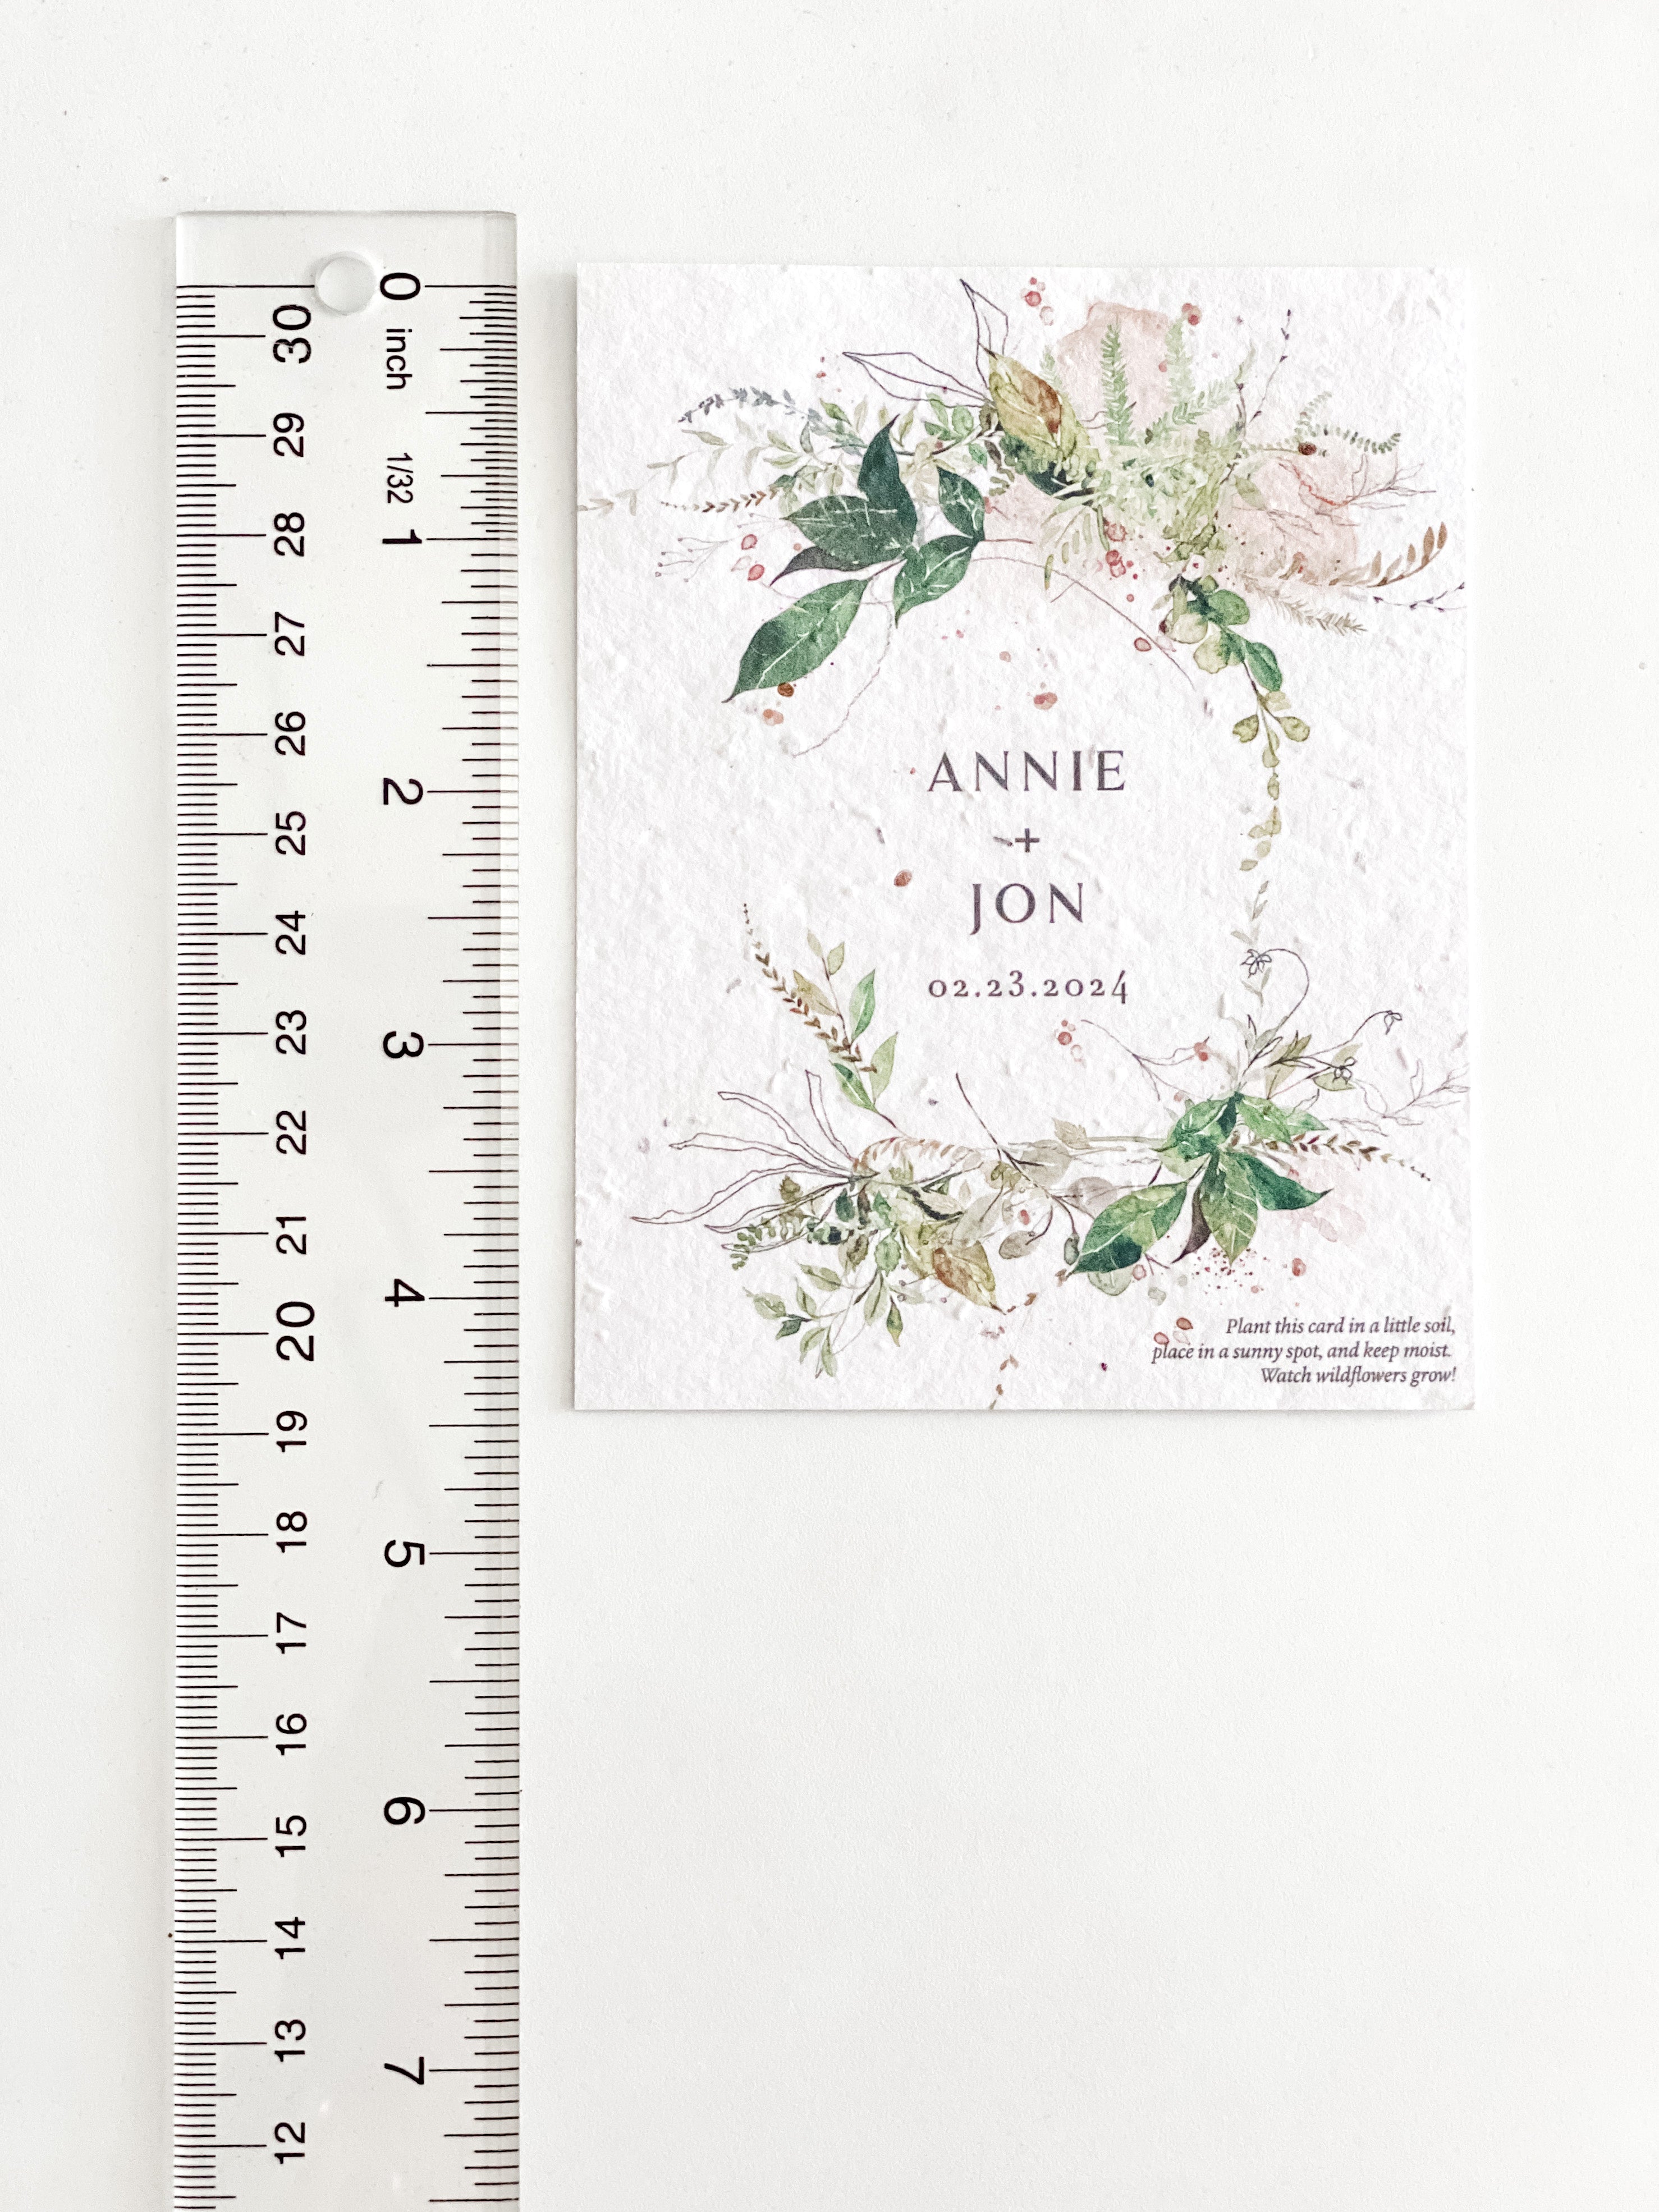 growNOTES™ No Waste Let Love Grow Seed Paper Card - Botanical